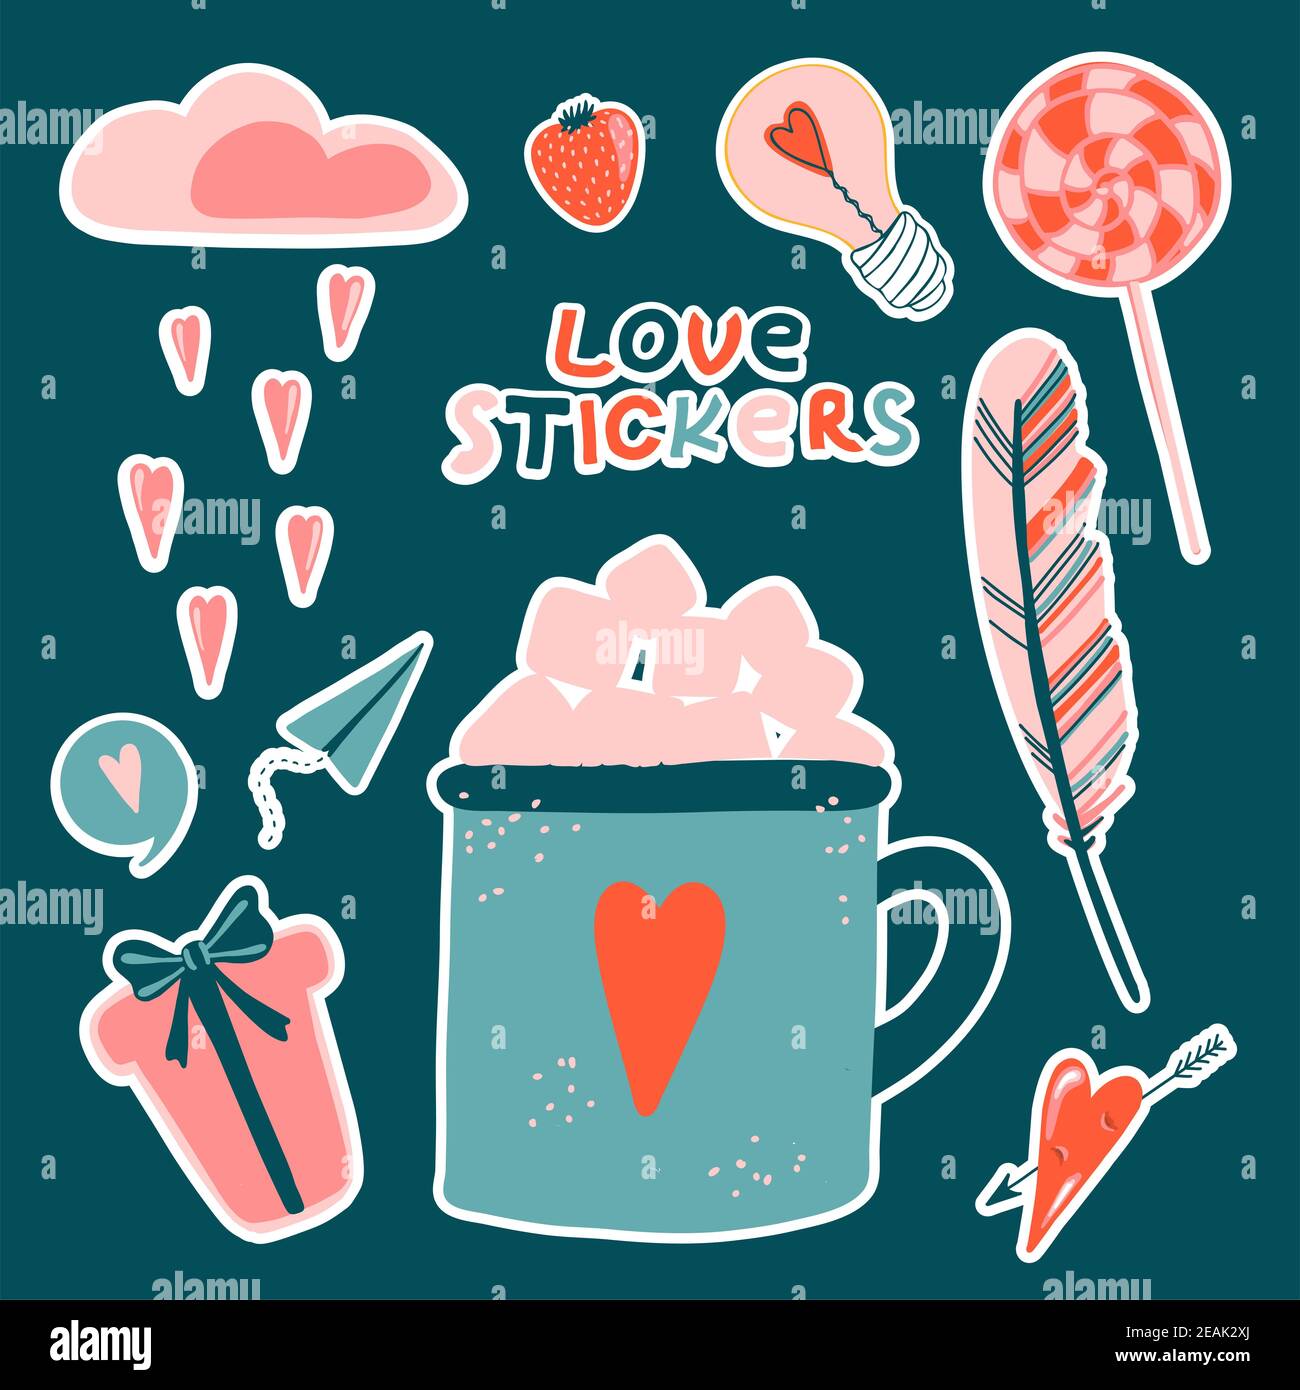 Love stickers. Signs, symbols, items and templates for planners, wedding invitations, notebooks, diaries, and Valentine's Day cards Stock Photo